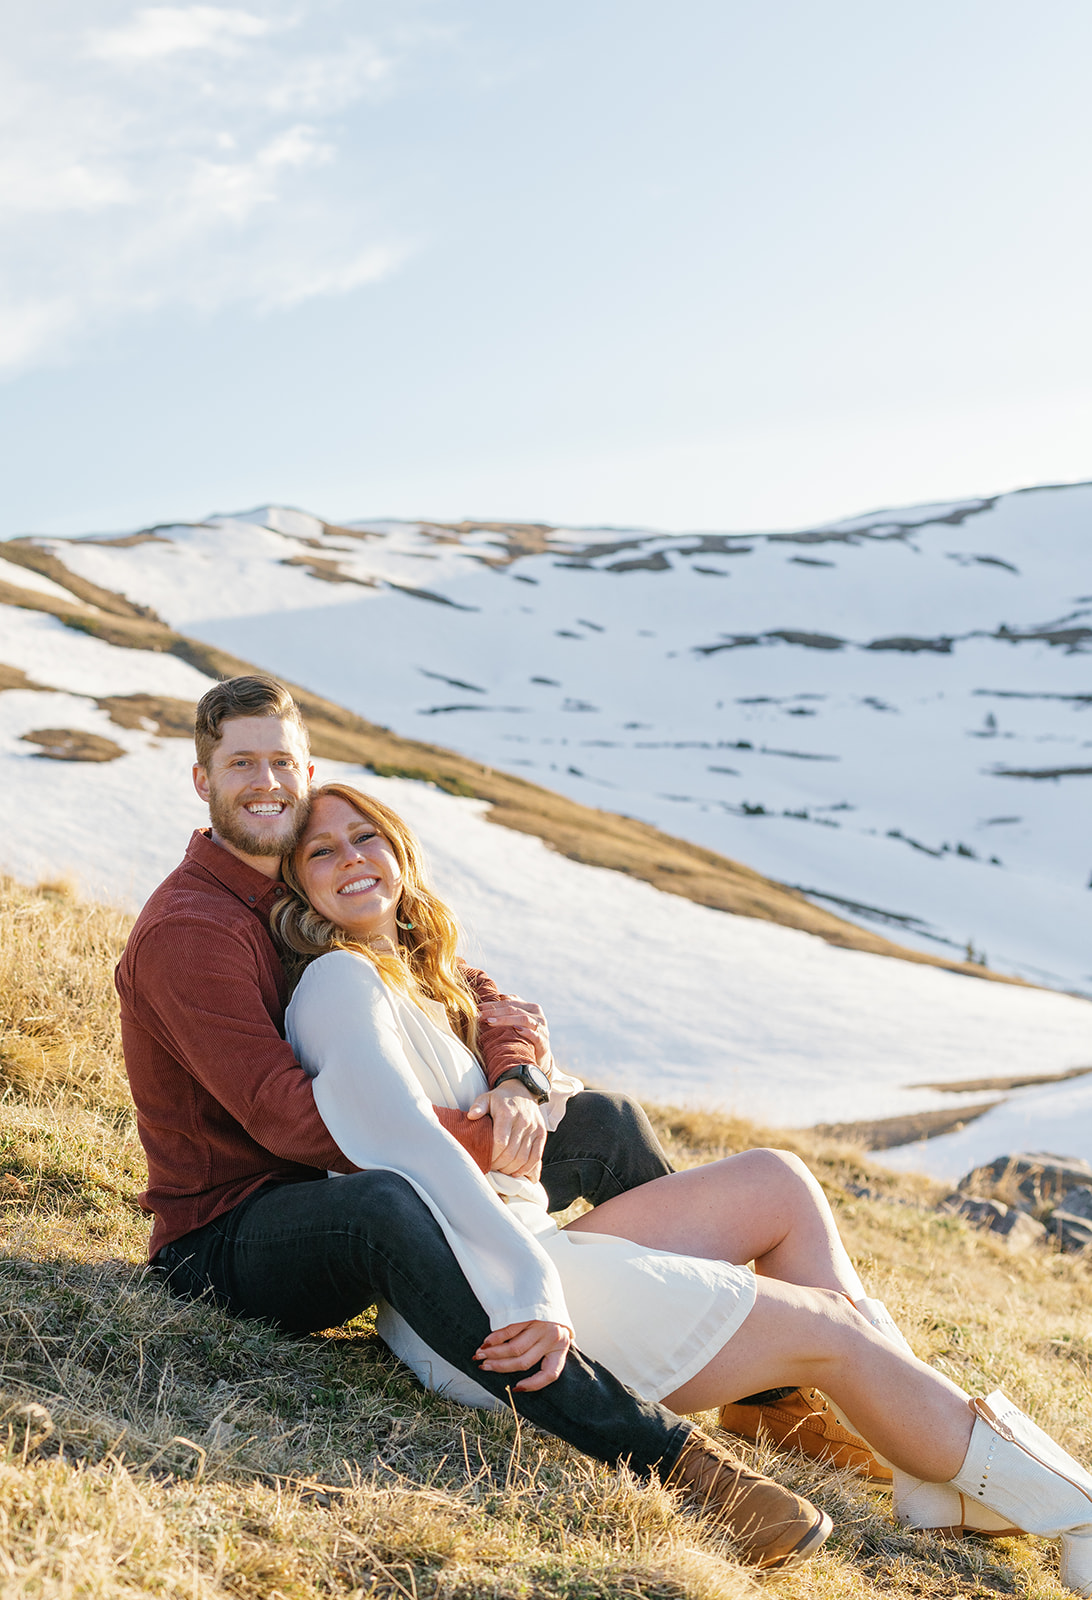 A woman in a white dress sits in the lap of her partner wearing a red shirt and dark jeans on a snowy mountainside